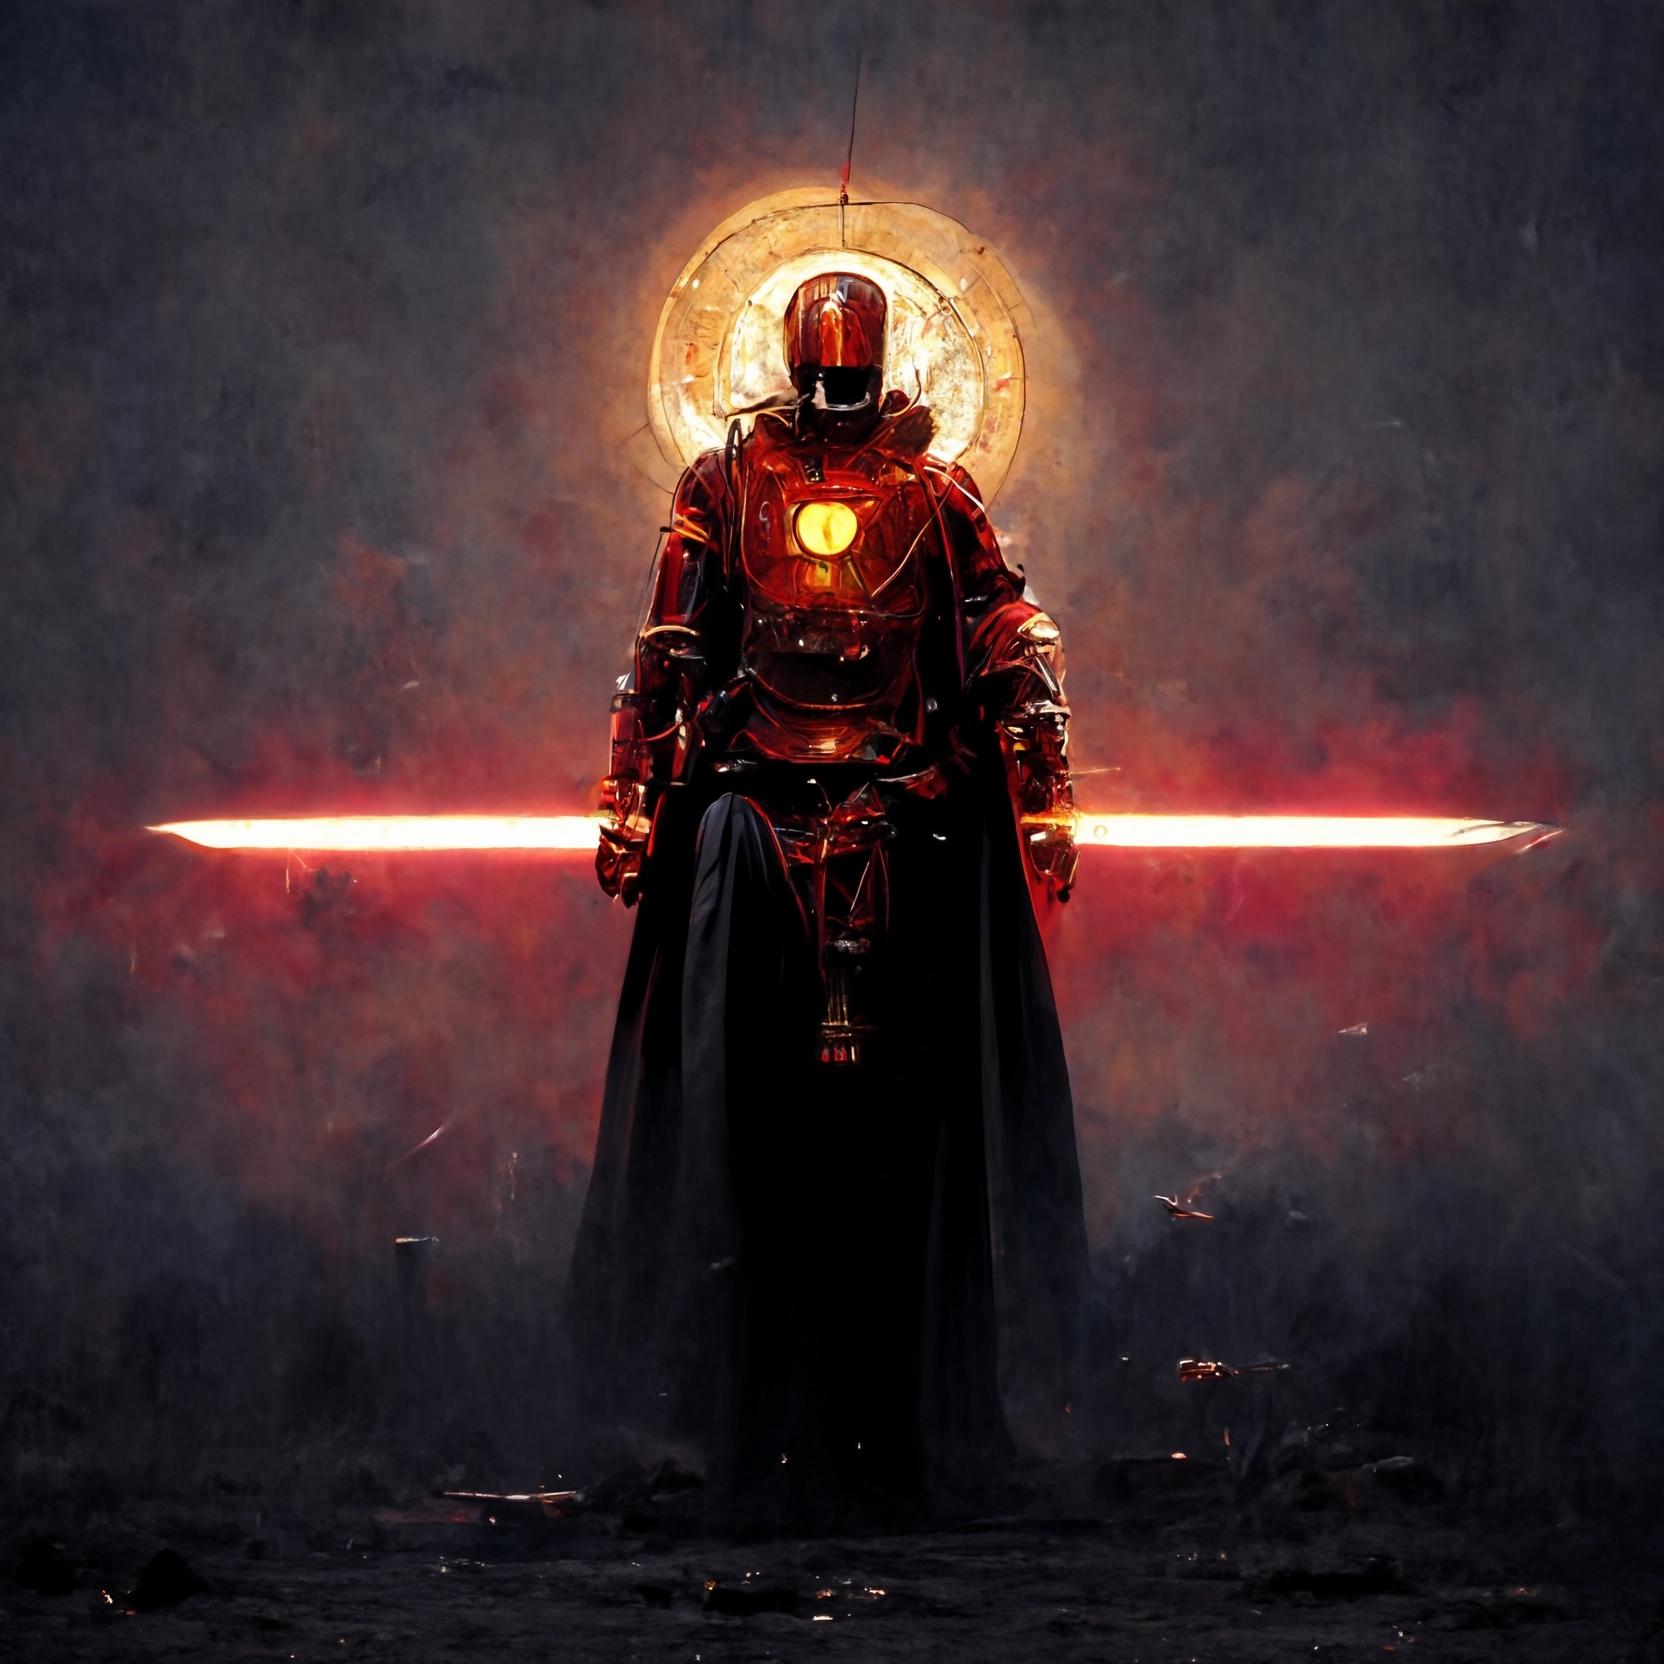 I was able to get some cool Iron Man X Darth Vader image using the new MidJourney AI Discord bot